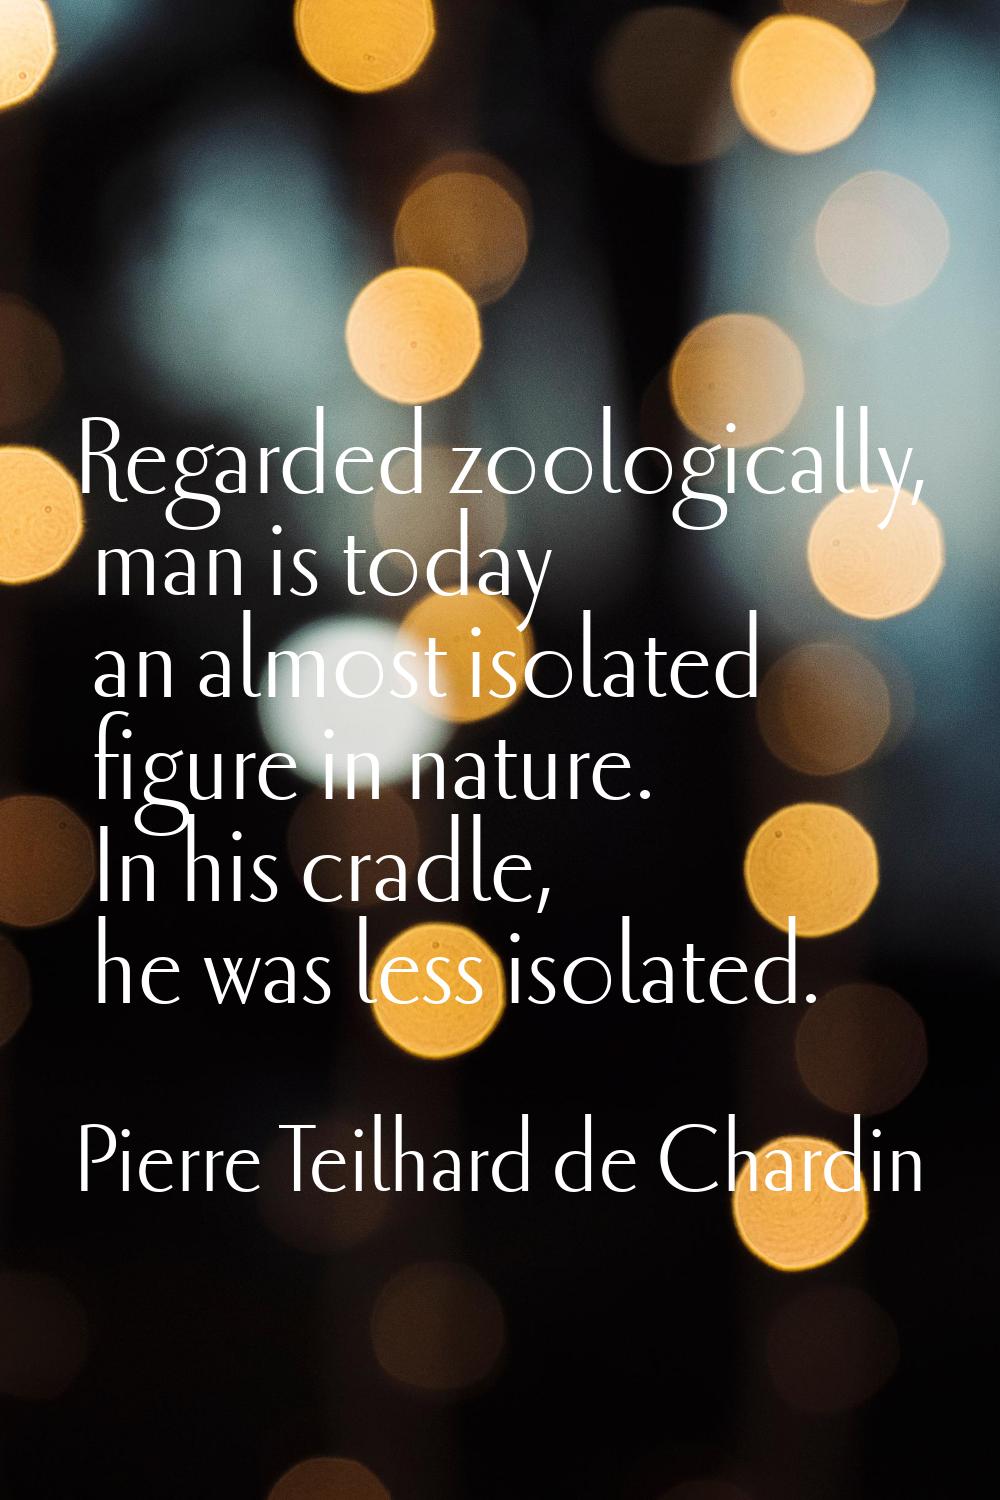 Regarded zoologically, man is today an almost isolated figure in nature. In his cradle, he was less